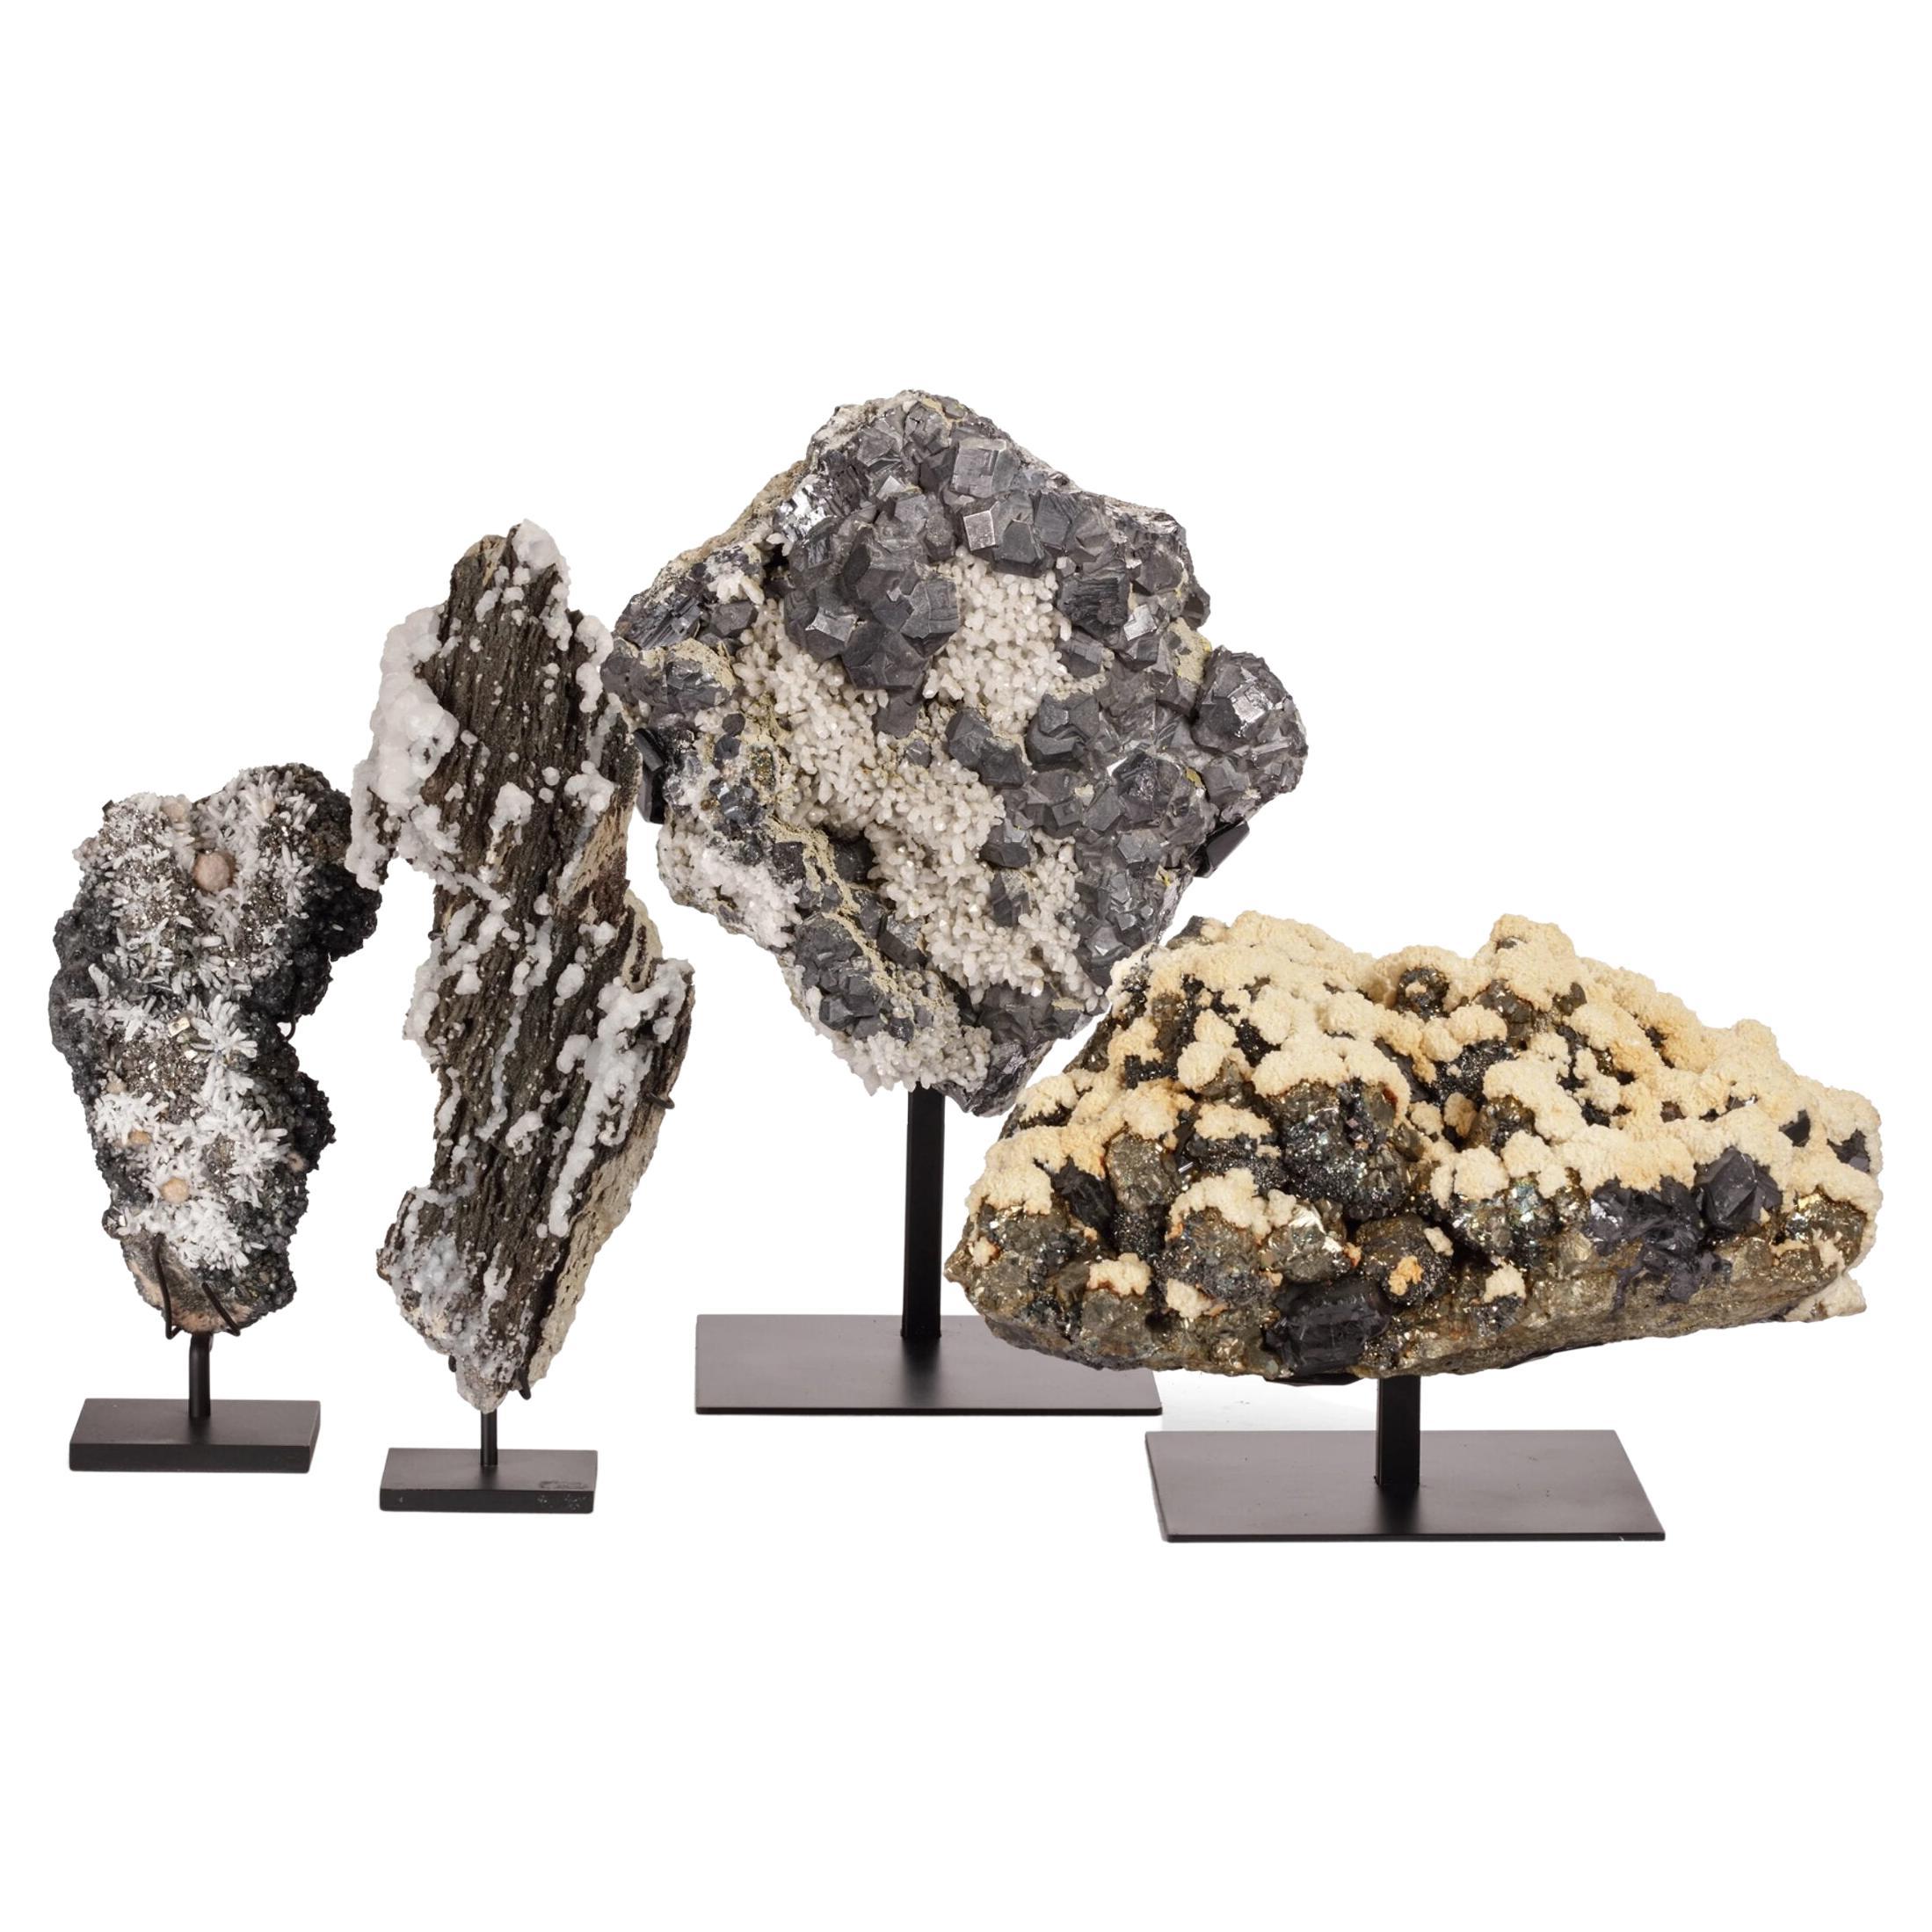 Collection of Splendid Mineral Specimens Naturally Formed as Snowy Mountains For Sale